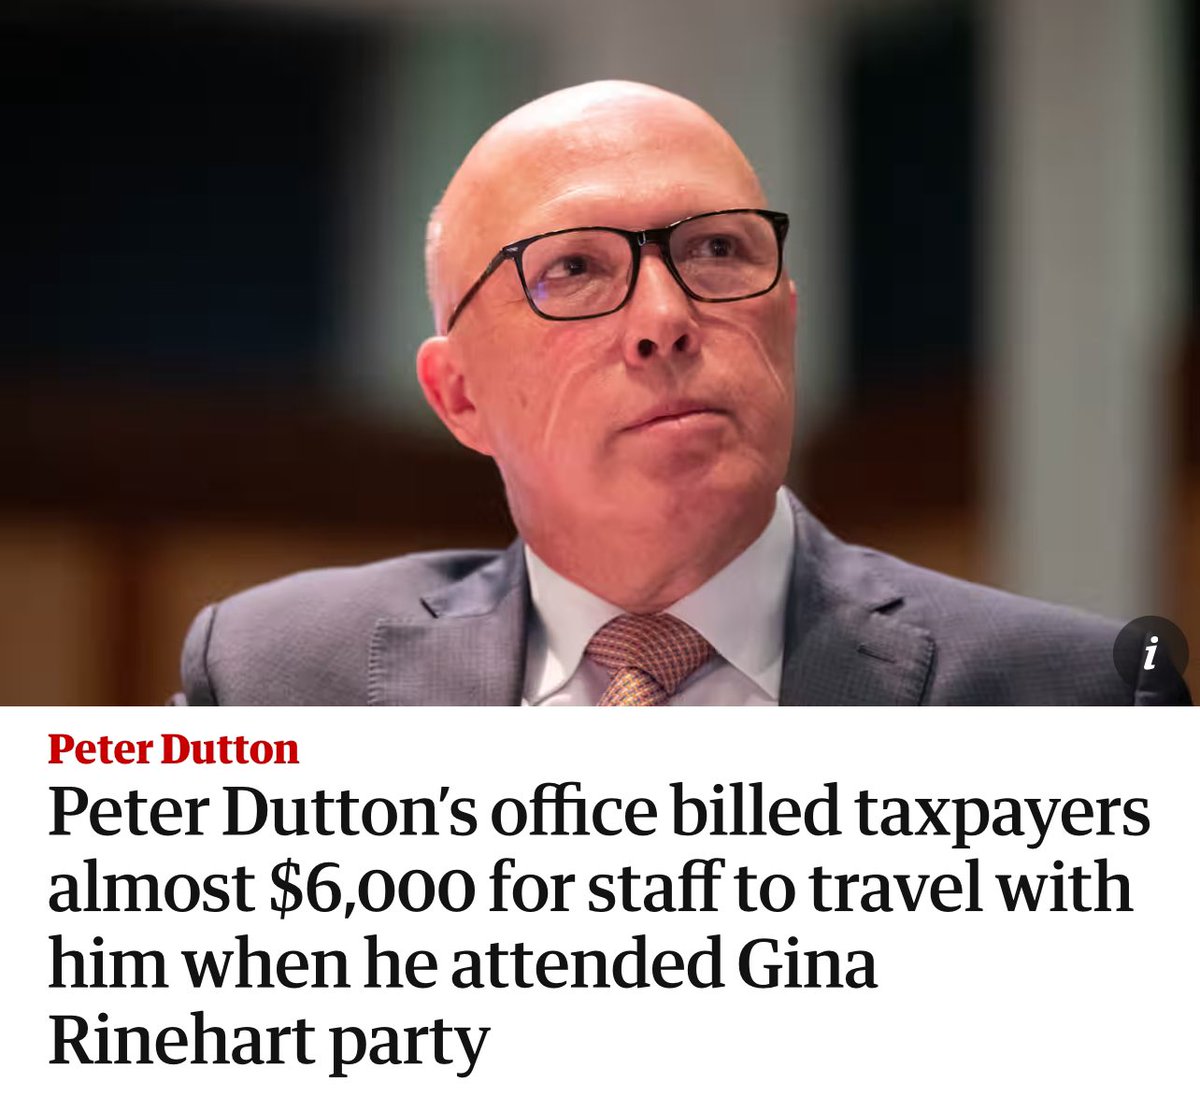 Quite frankly I’m getting fed up with having to pay for Liberal Party politicians to attend luxury parties with the high end of town. If they want to party with billionaires, we should not have to pay. 💰😡